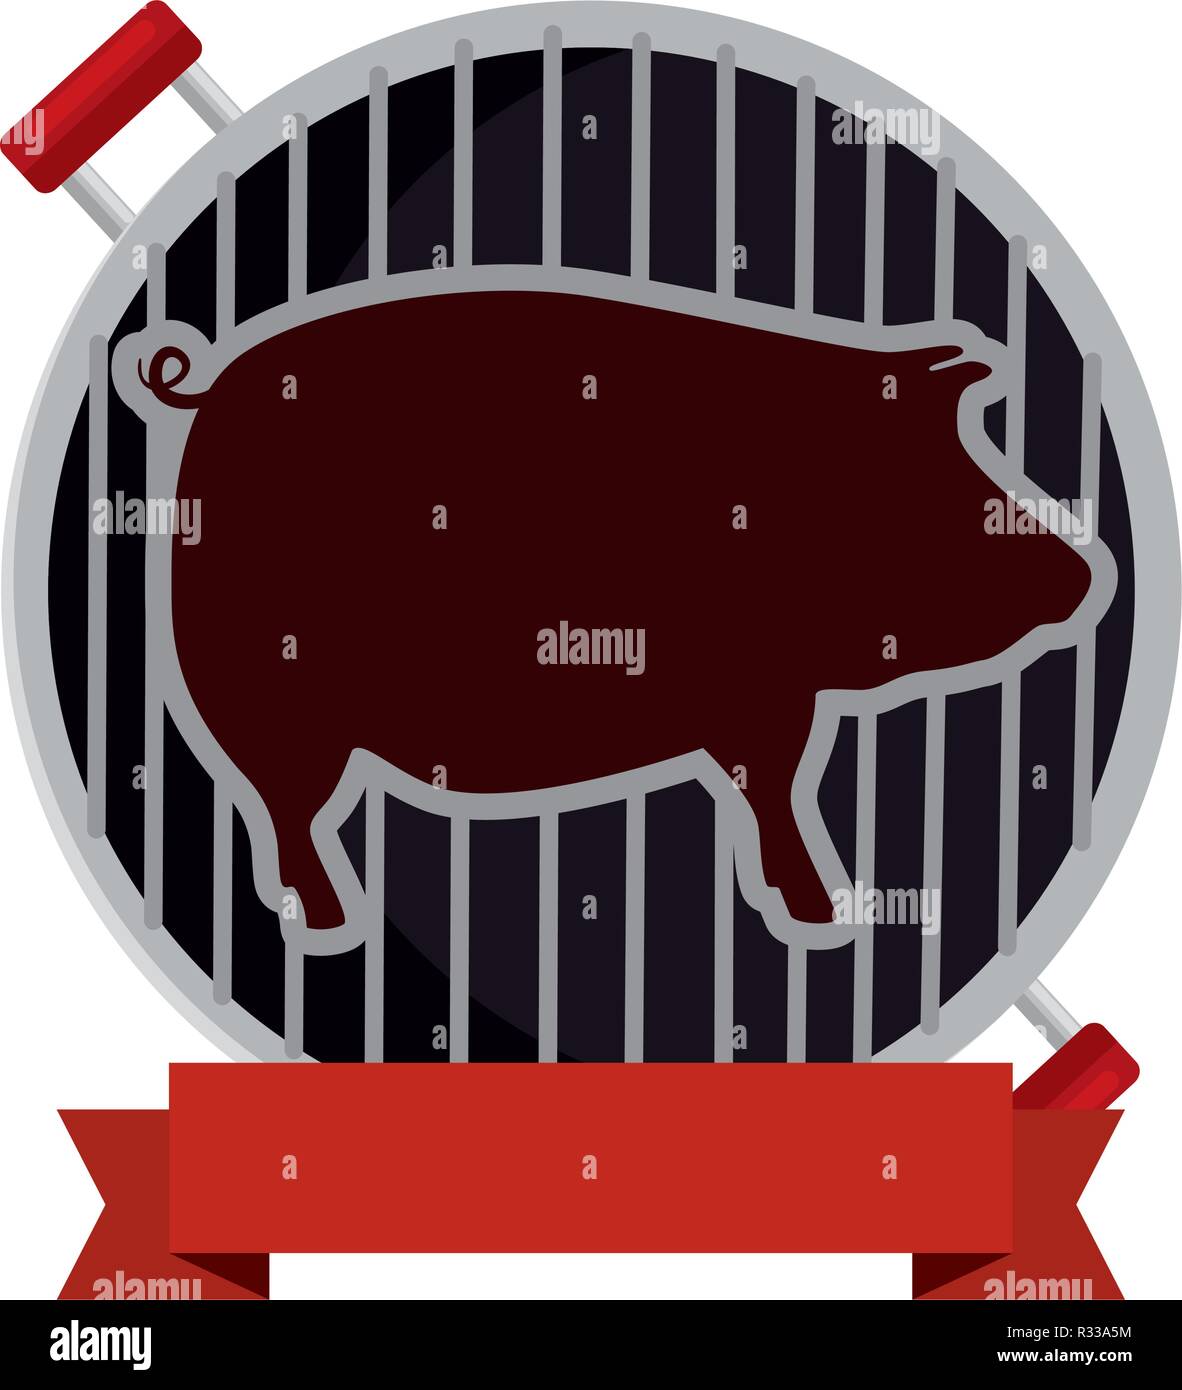 bbq grill oven with pig silhouette vector illustration design Stock Vector